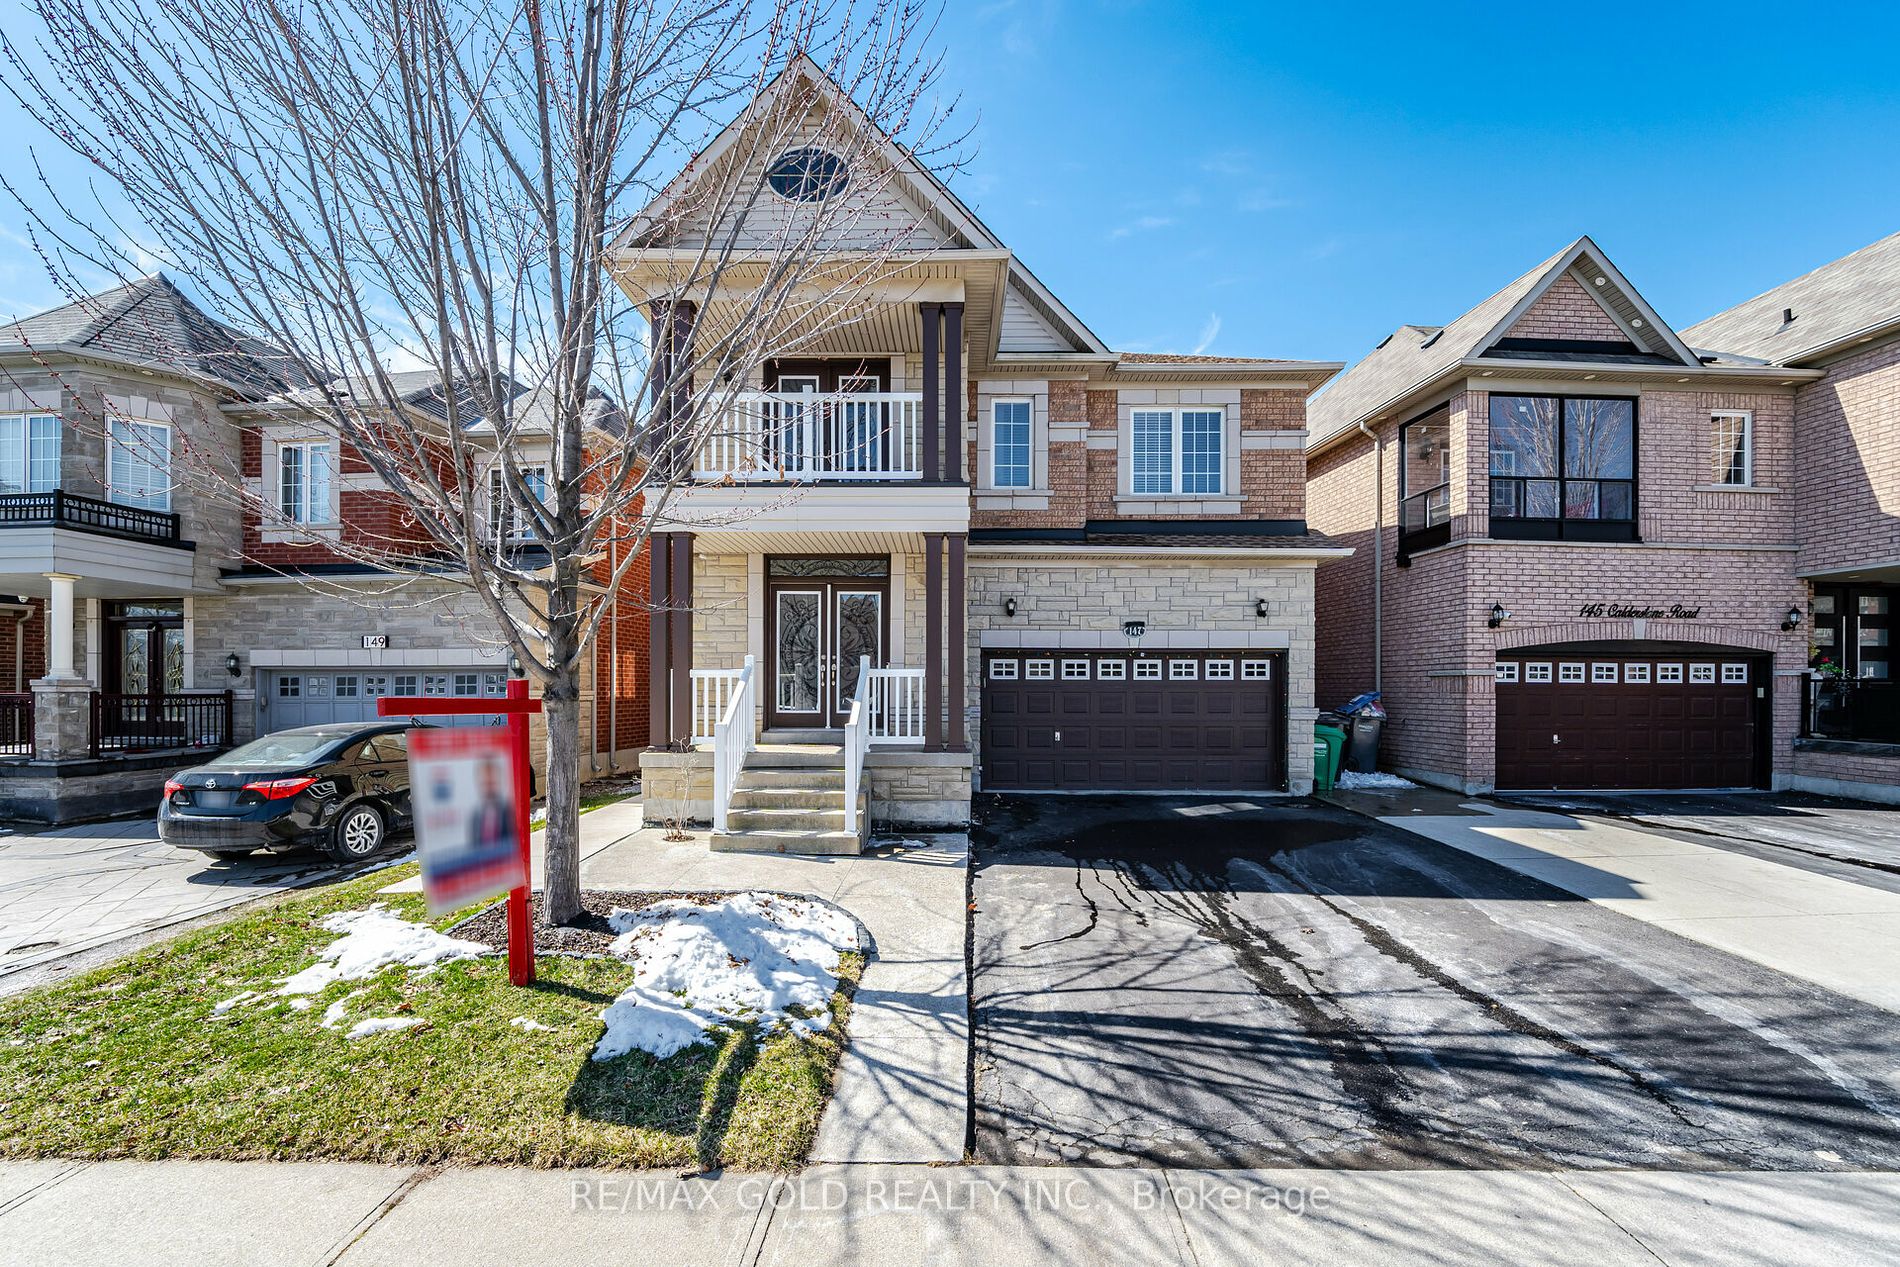 Detached house for sale at 147 Calderstone Rd Brampton Ontario